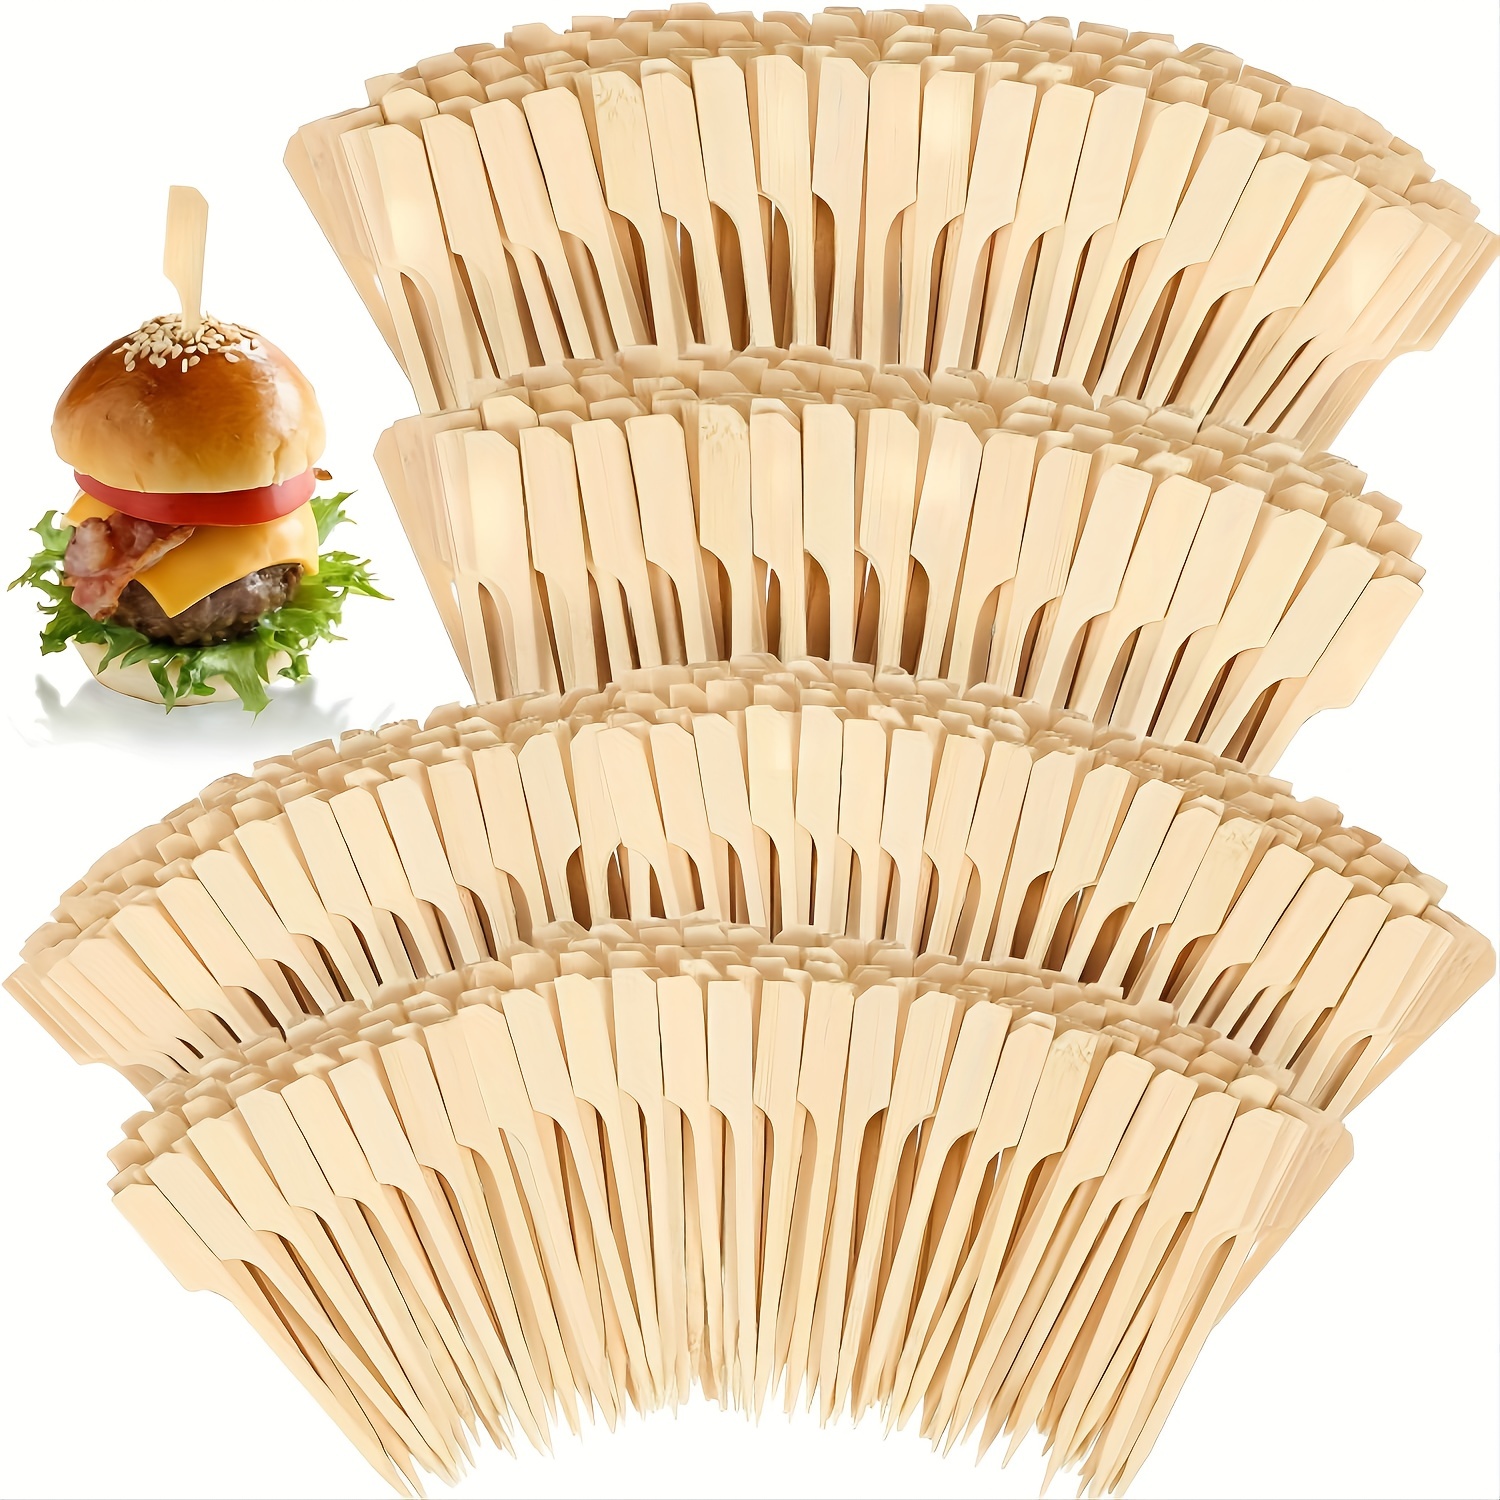 Bamboo skewers barbecue wood sticks for outdoor picnic - 25 pcs